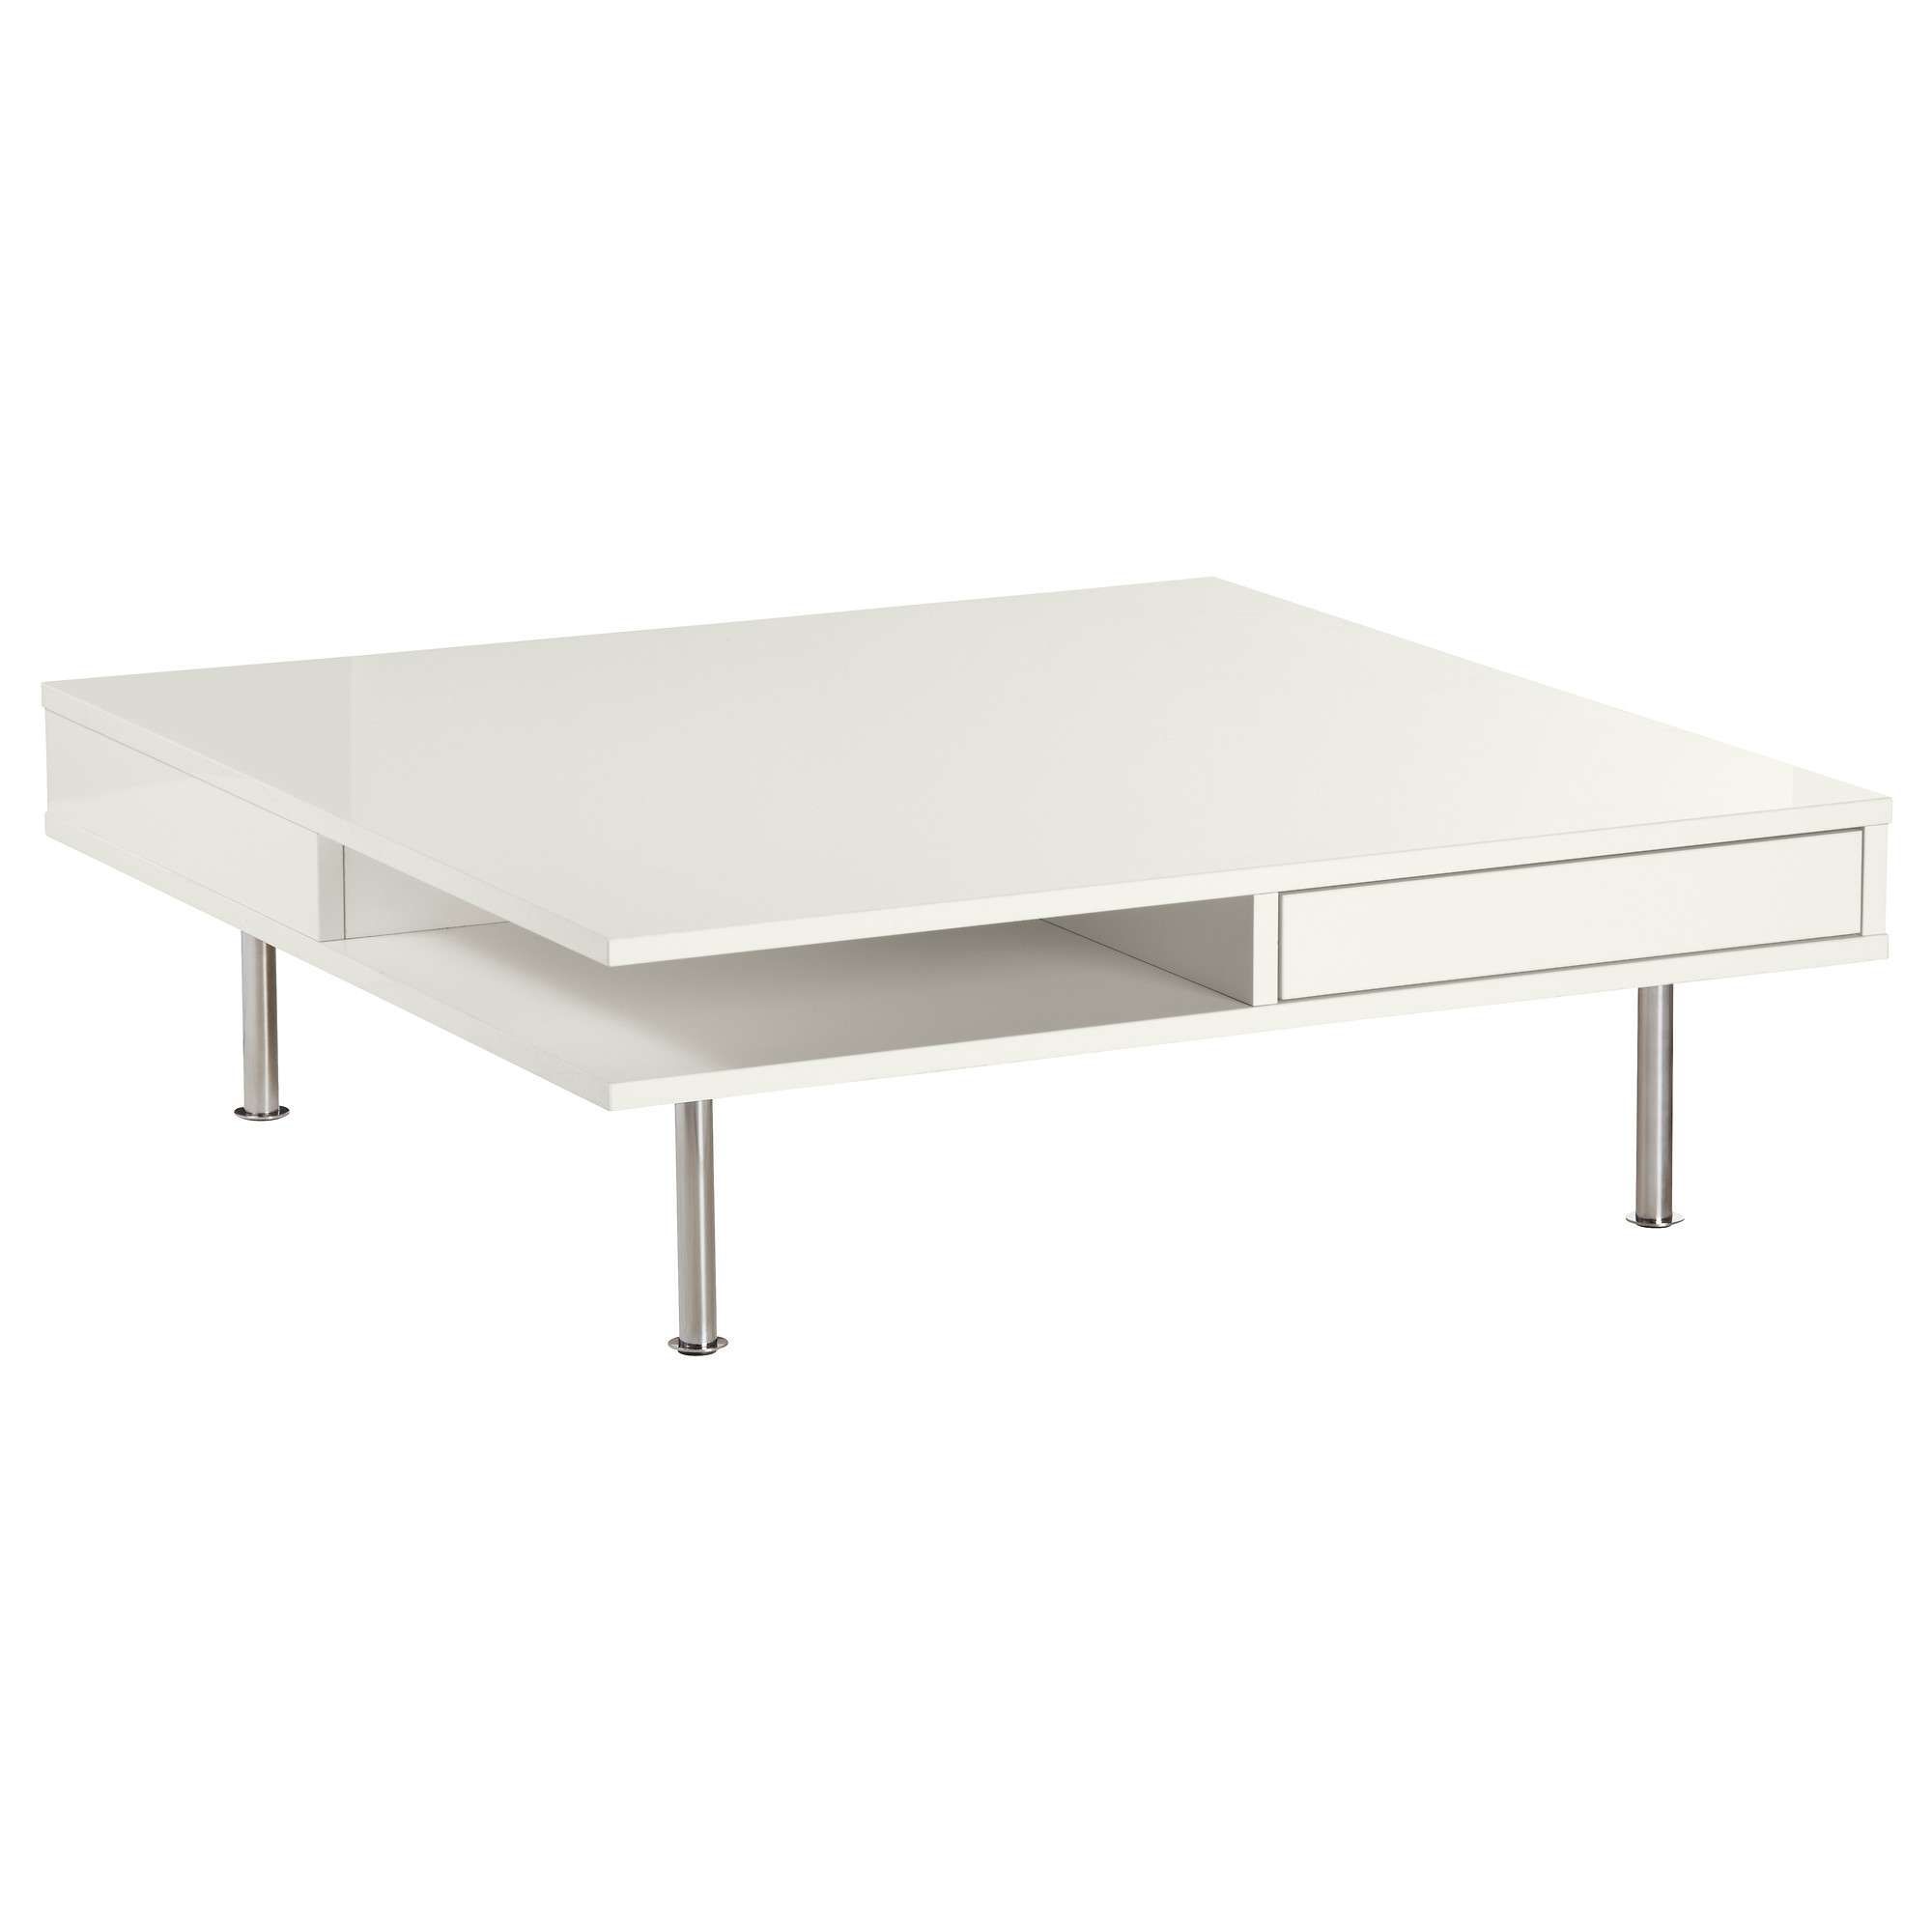 Well Known High Coffee Tables Pertaining To Tofteryd Coffee Table – High Gloss White – Ikea (View 15 of 20)